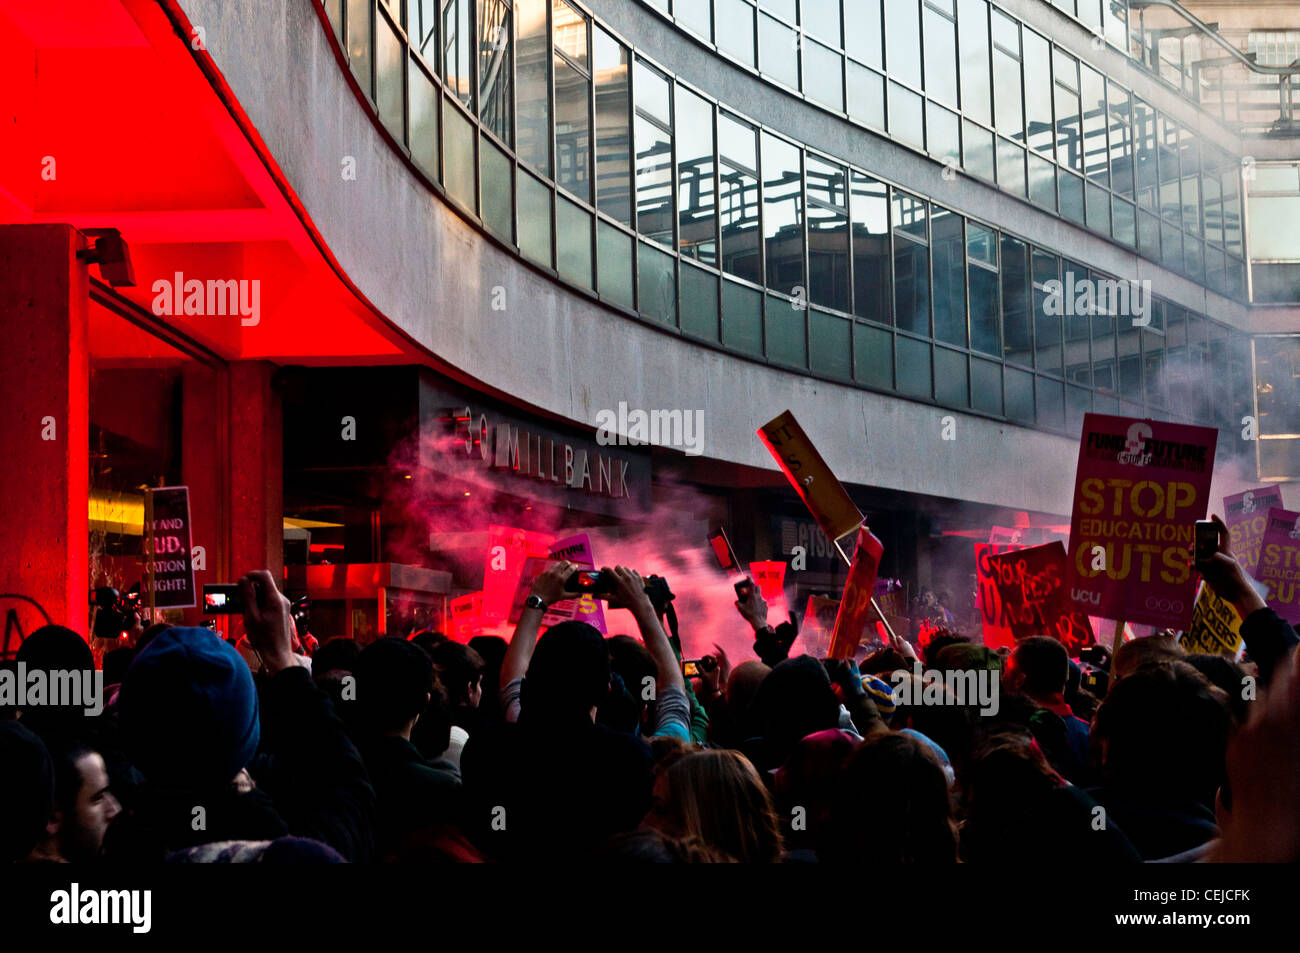 Student protesters ignite a red flare outside 30 Millbank, London, during NUS protest against tuition fee rises on Nov 10 2010. Stock Photo